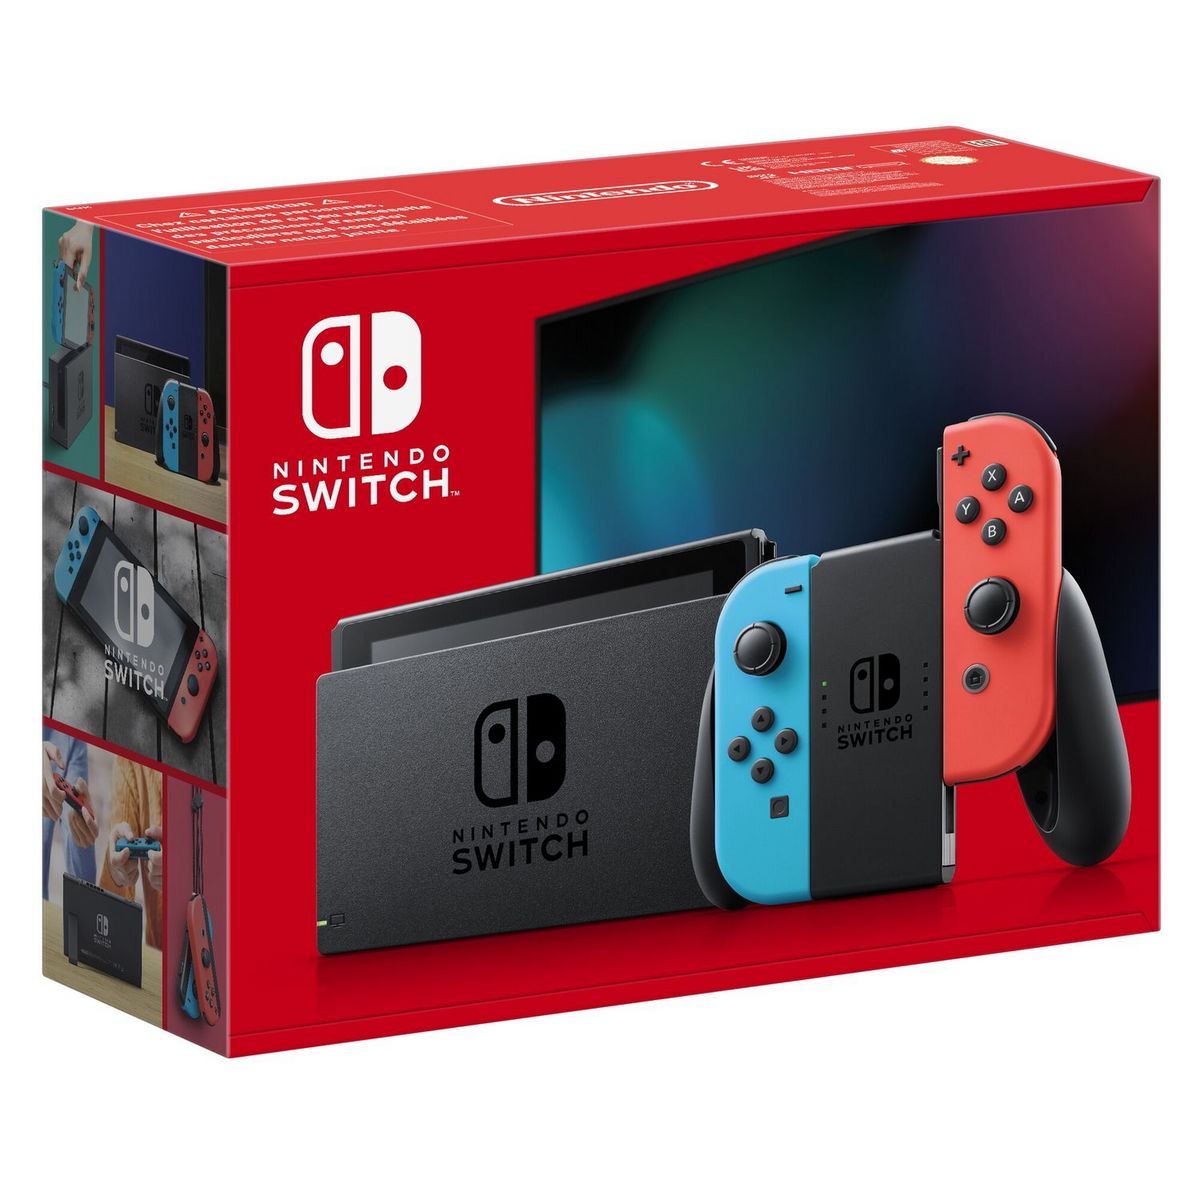 Console Nintendo Switch 1.2 Neon Red/Blue pas cher 